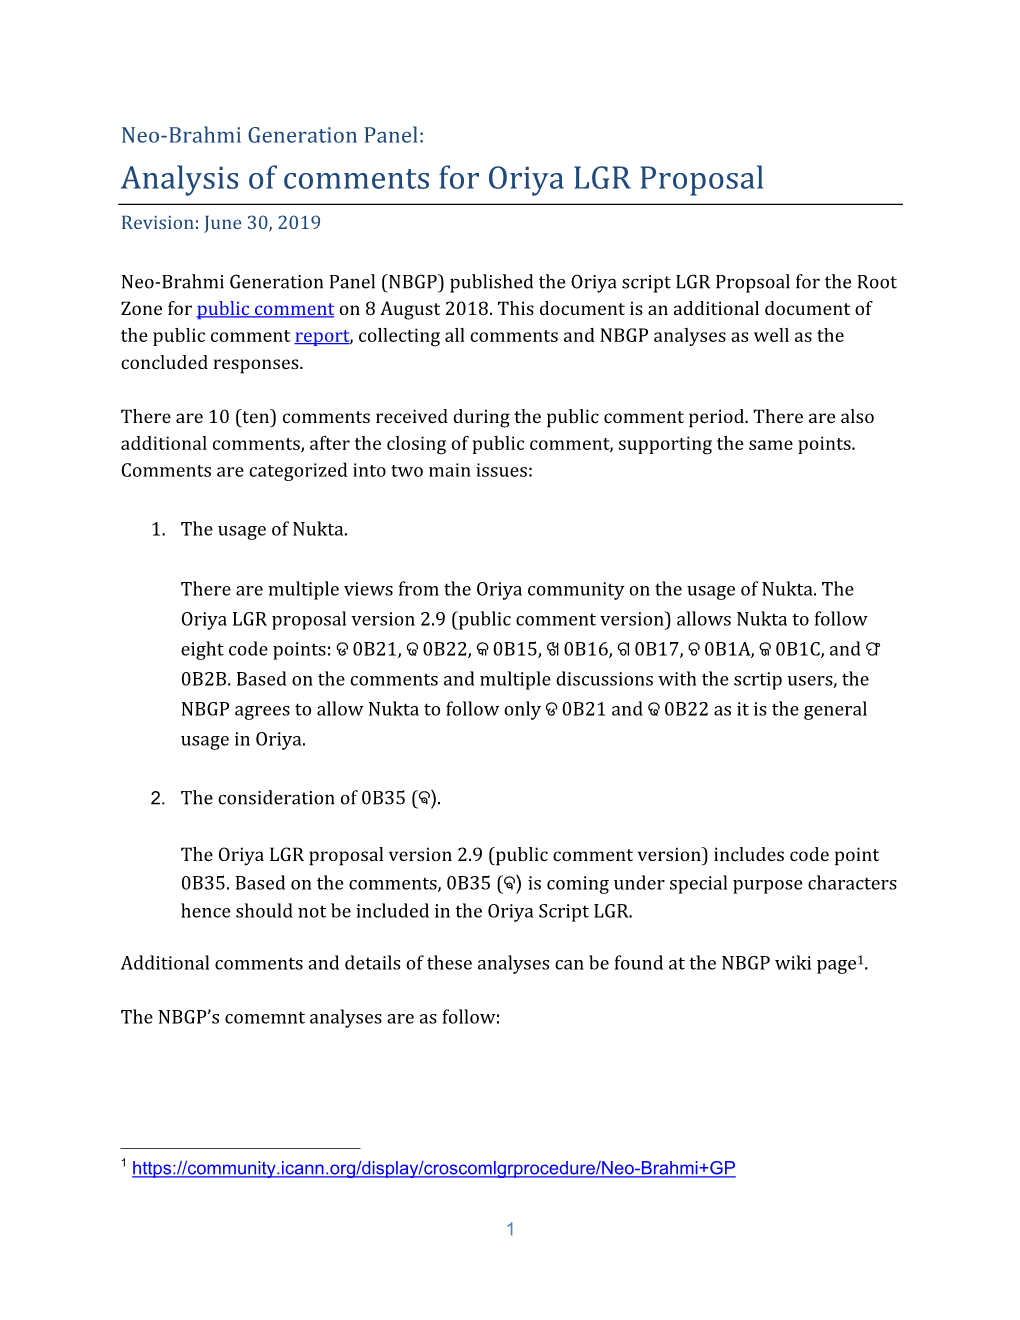 Analysis of Comments for Oriya LGR Proposal Revision: June 30, 2019